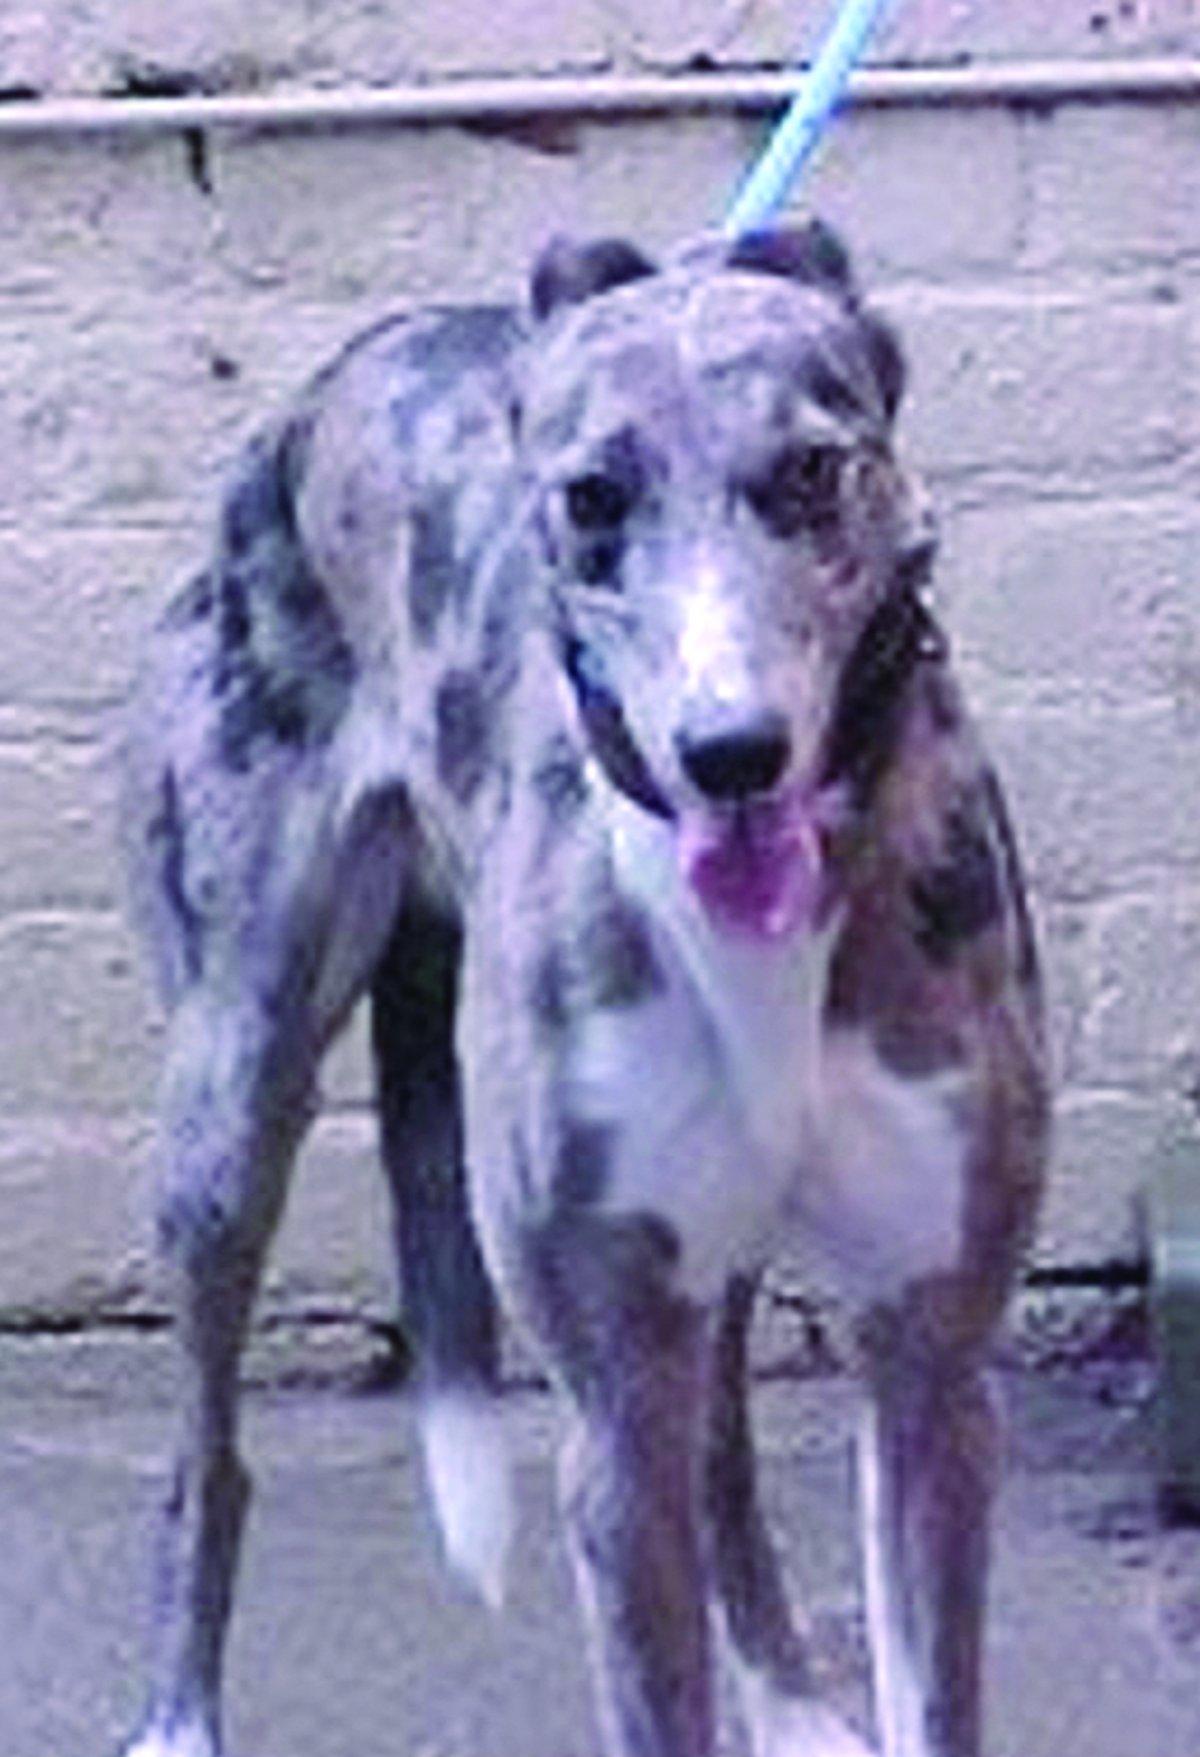 Can you give a dog a new life?
“Larry is a blue Merle lurcher. He is currently booked in to be put to sleep next week, so we have got him coming to us instead.”
